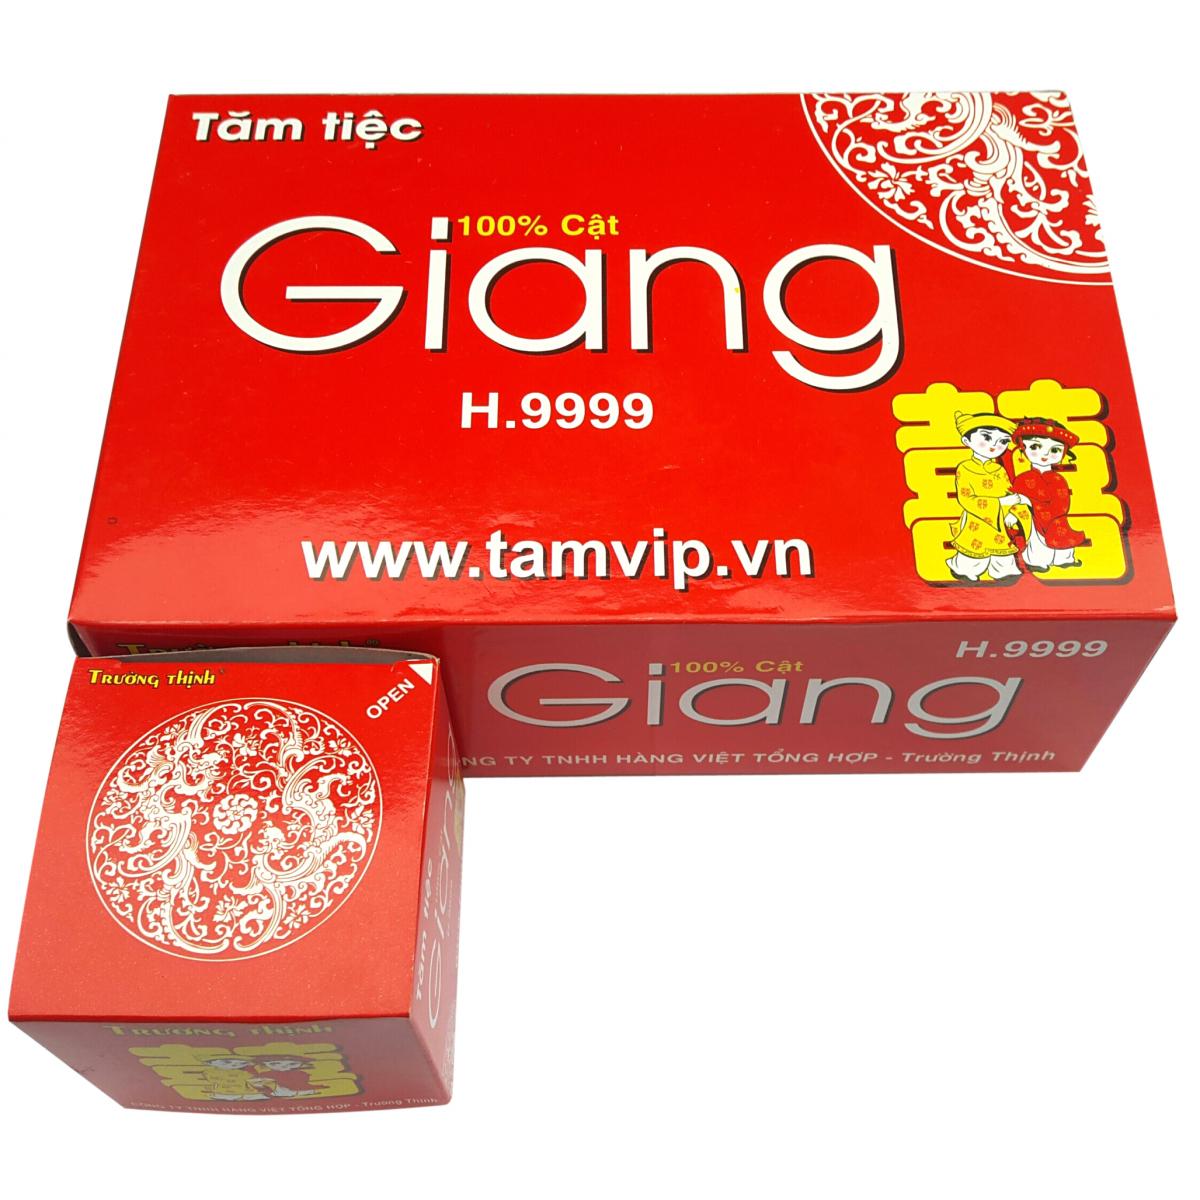 Hỷ giang 9999